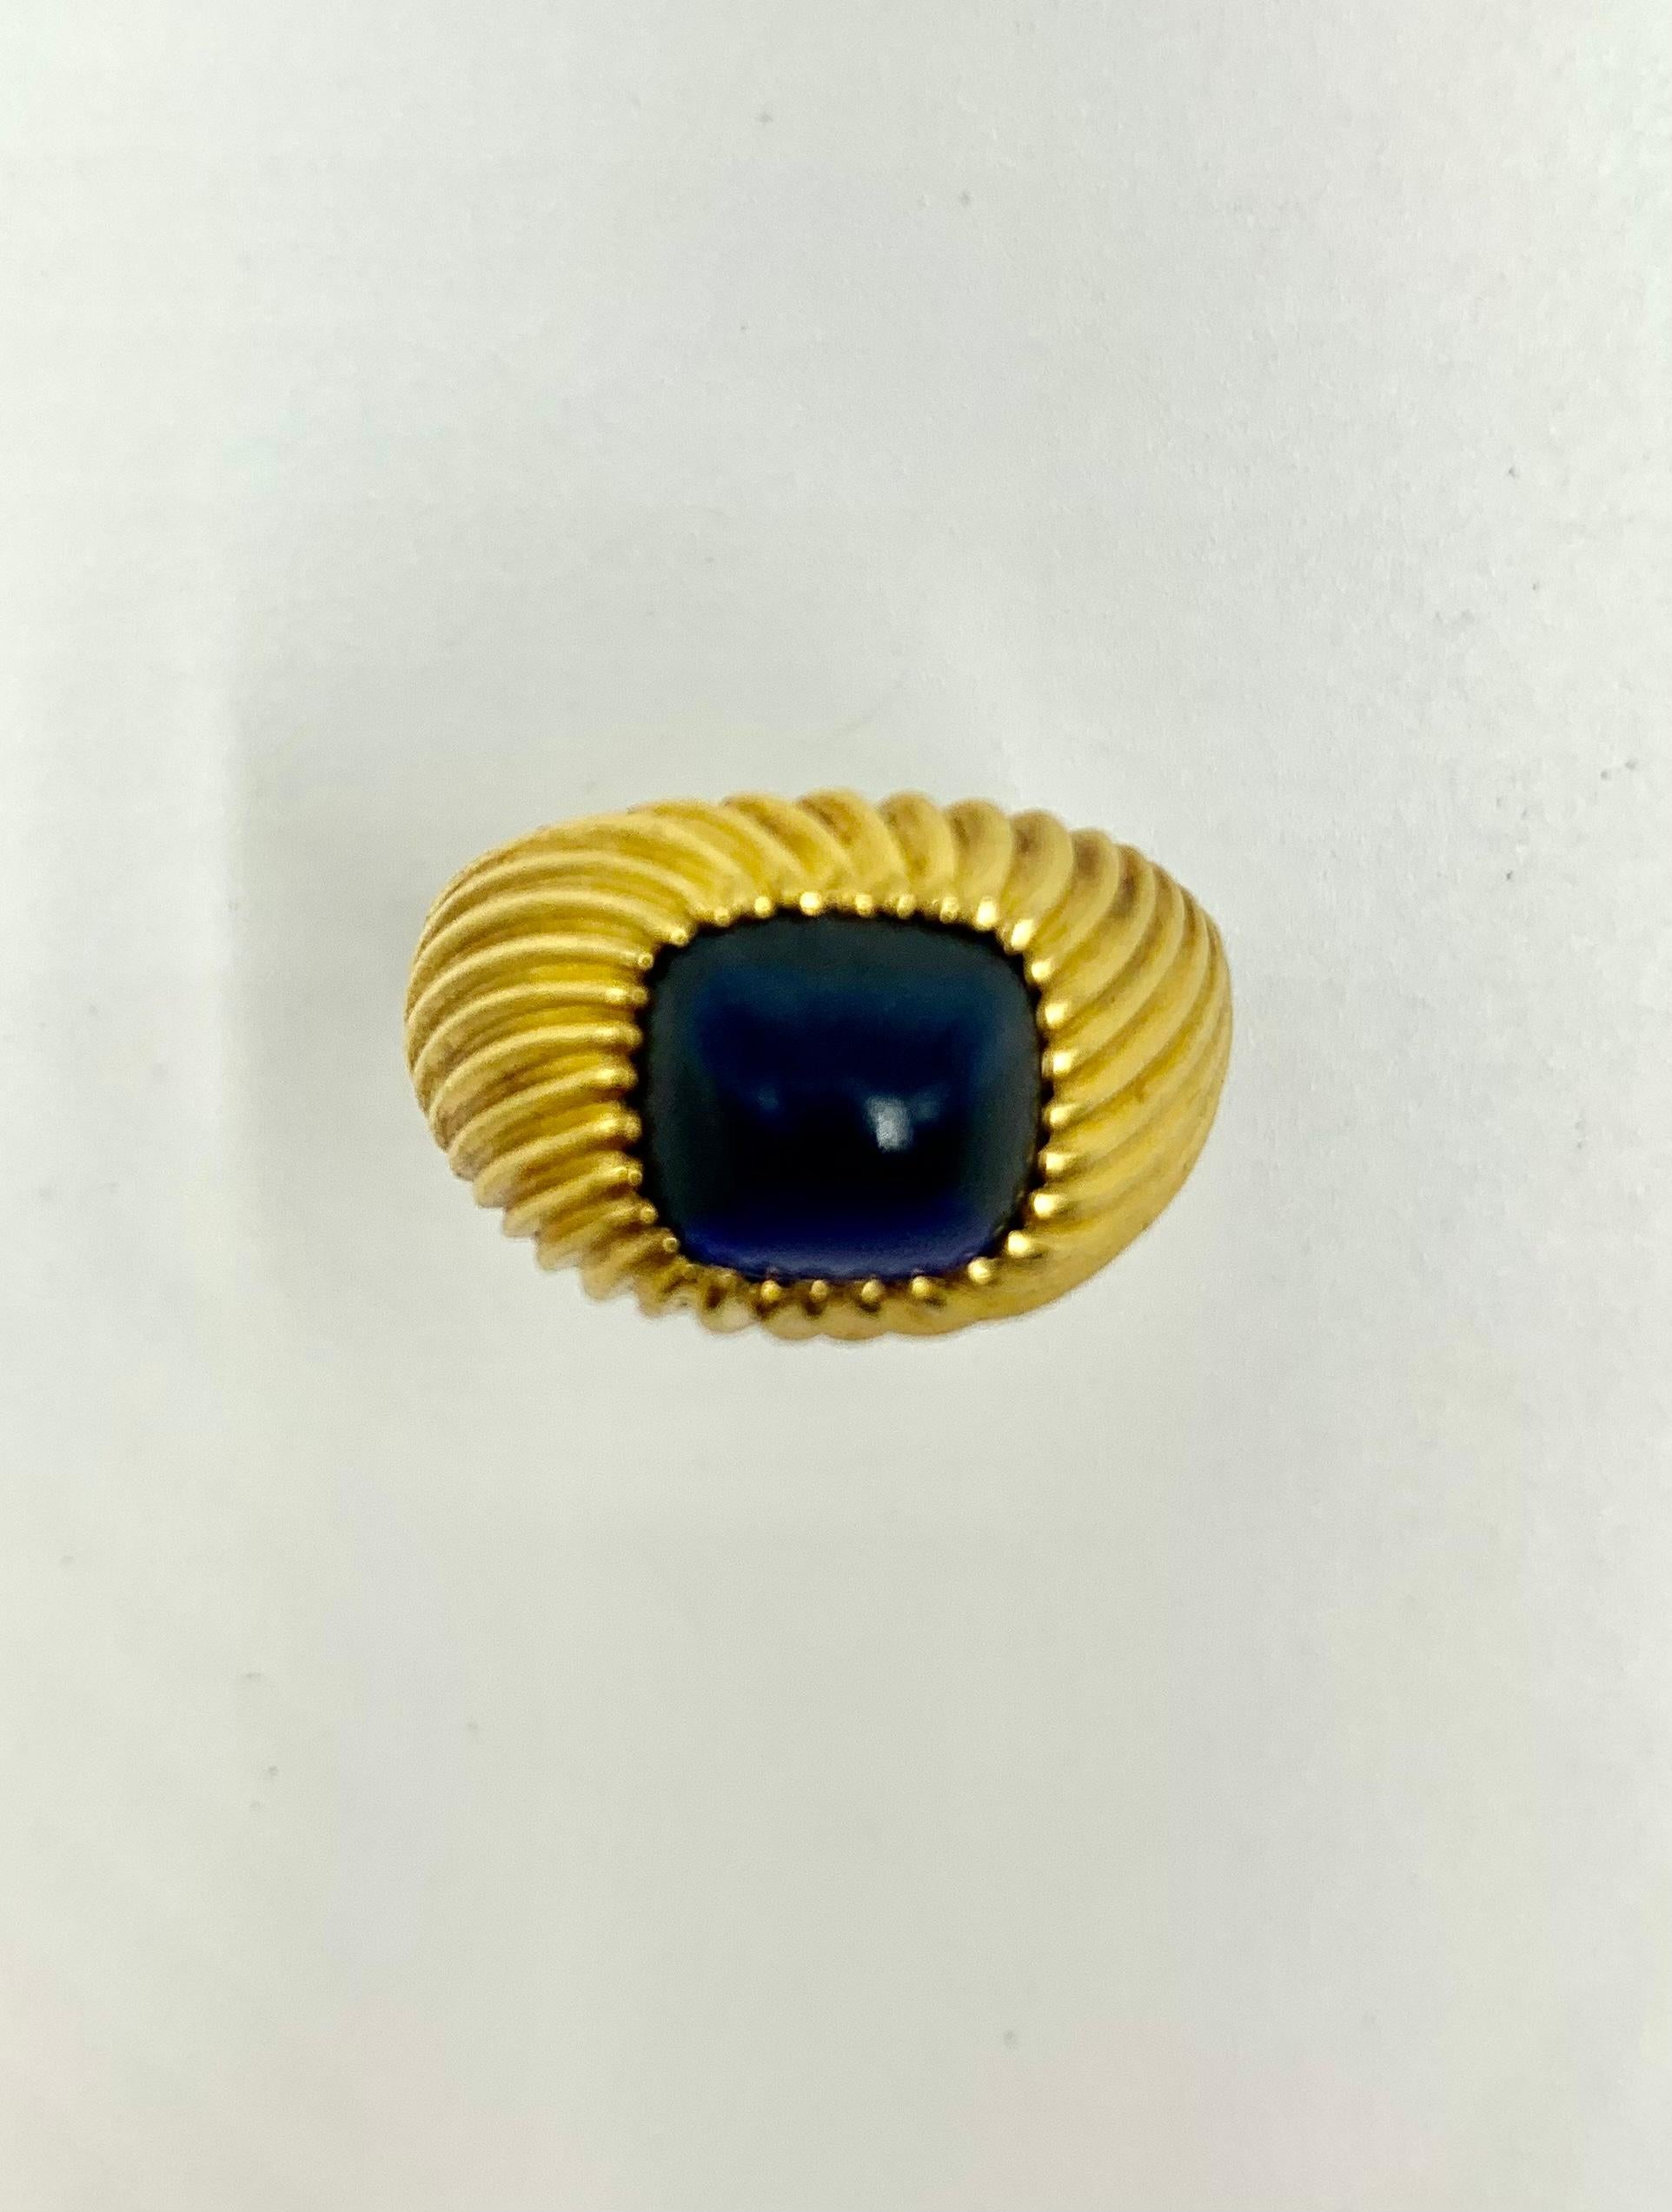 Fine vintage sapphire 18K gold ring featuring an 8mm by 8mm by 6mm, sugarloaf cabochon sapphire set in a superb tourbillon twist design setting. The gemstone showing rich, deep blue color, especially lovely in natural light, light inclusions when